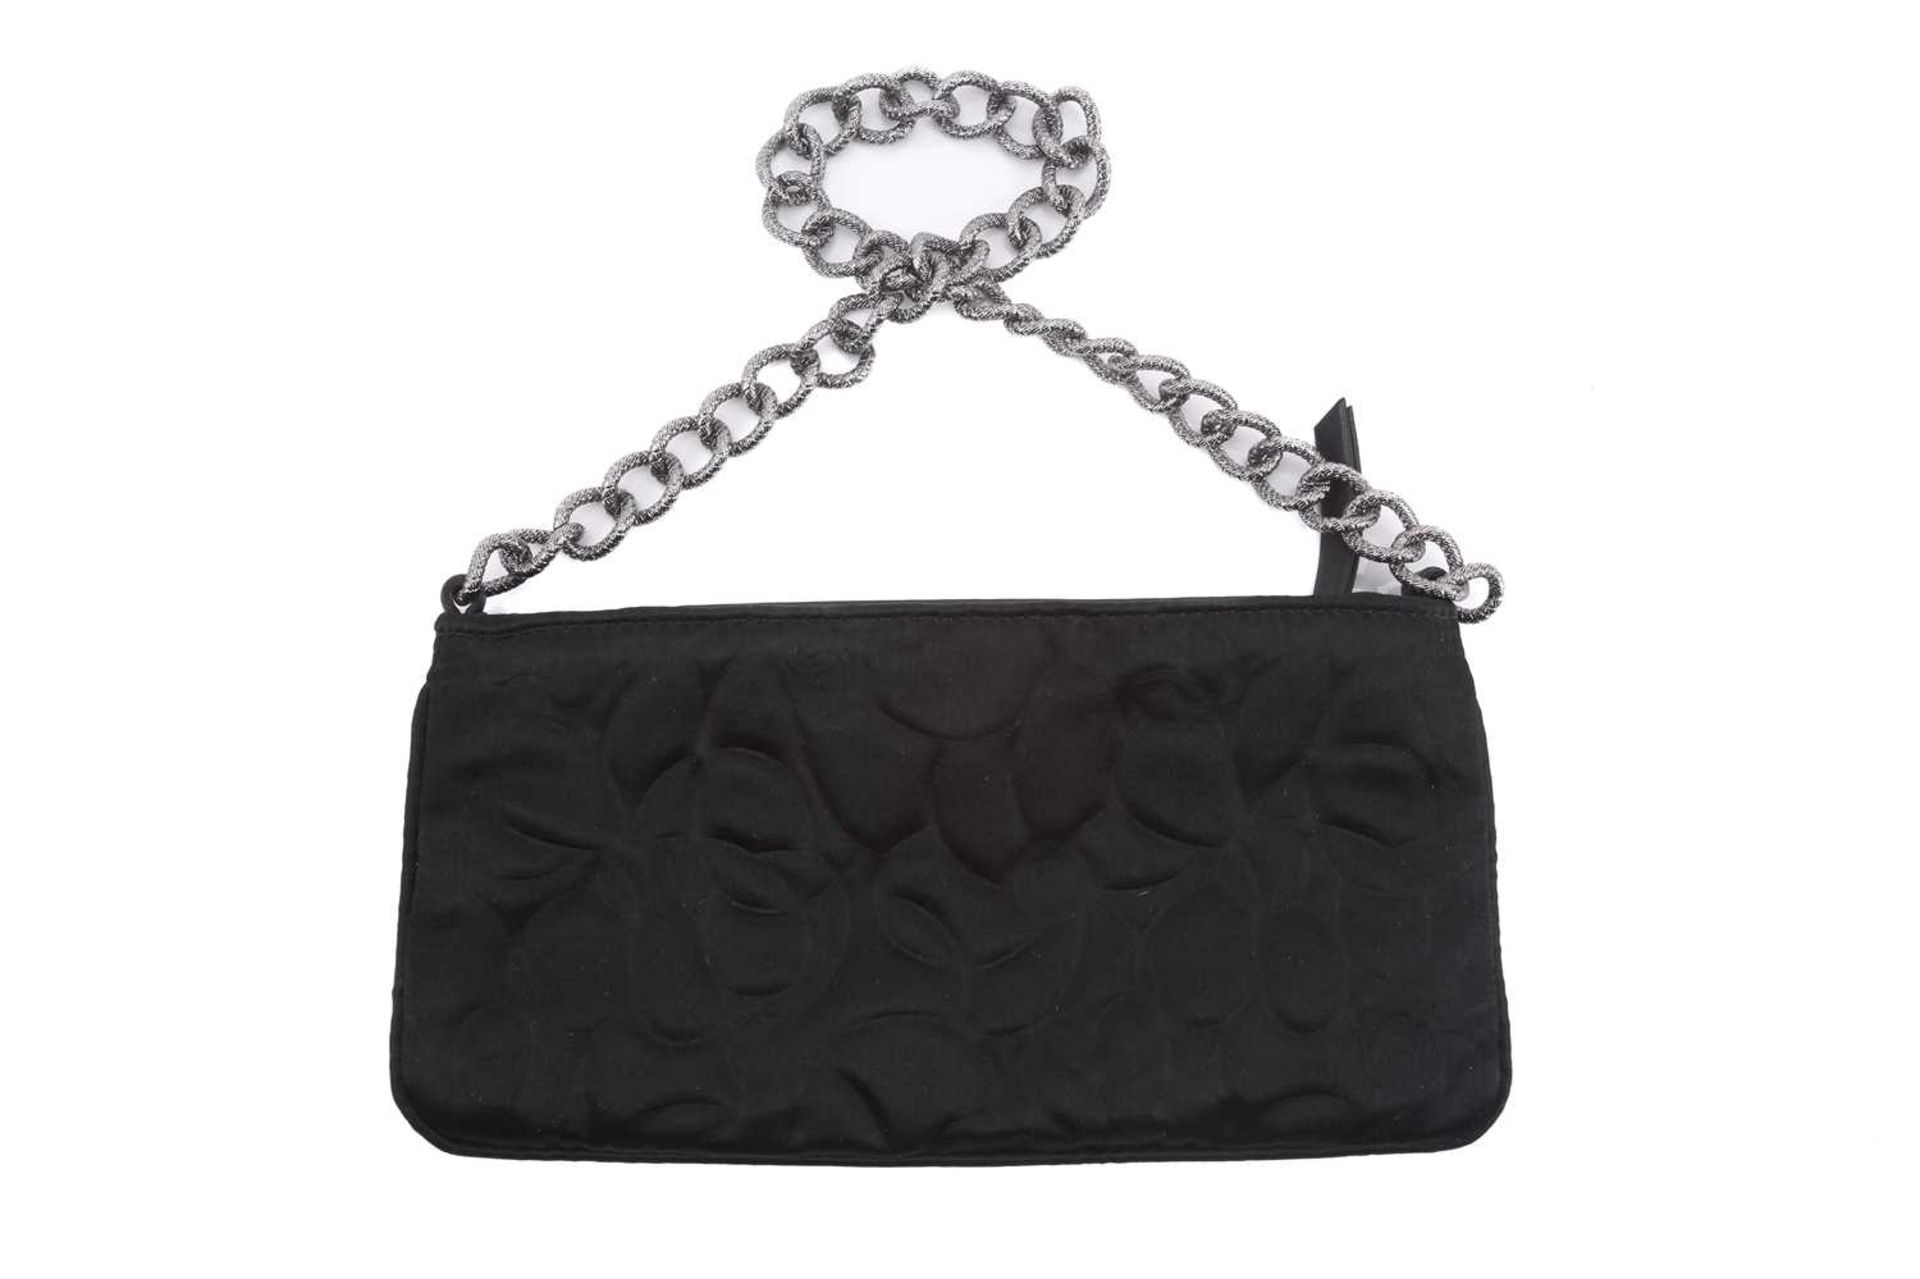 Chanel - two satin Camélia Pochettes; designed by Karl Lagerfeld, both black and white evening - Image 9 of 15